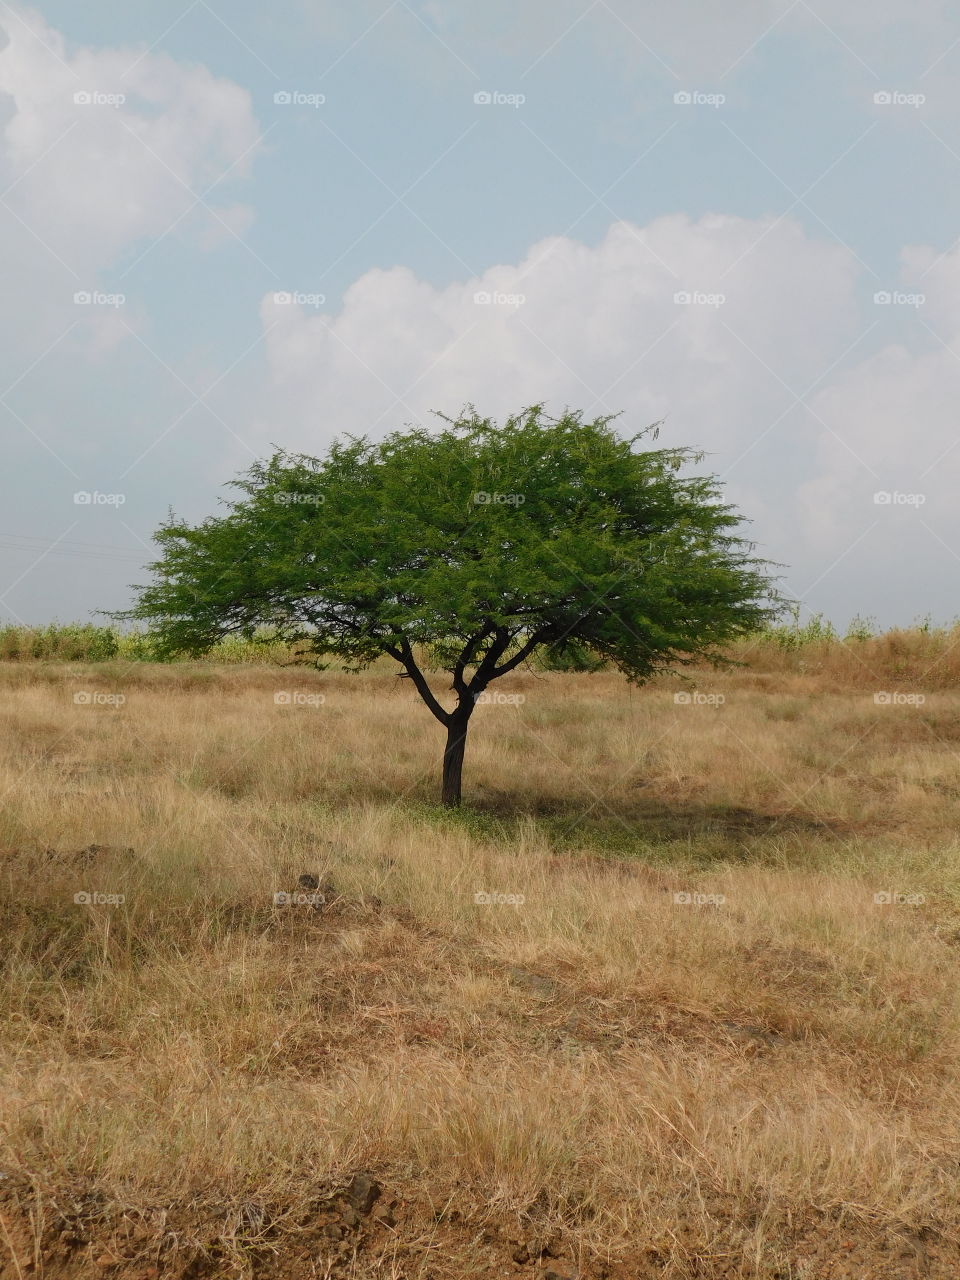 This is a beautiful tree in a vast field.Its propped at a top of hill with a beautiful landscape surrounding it.